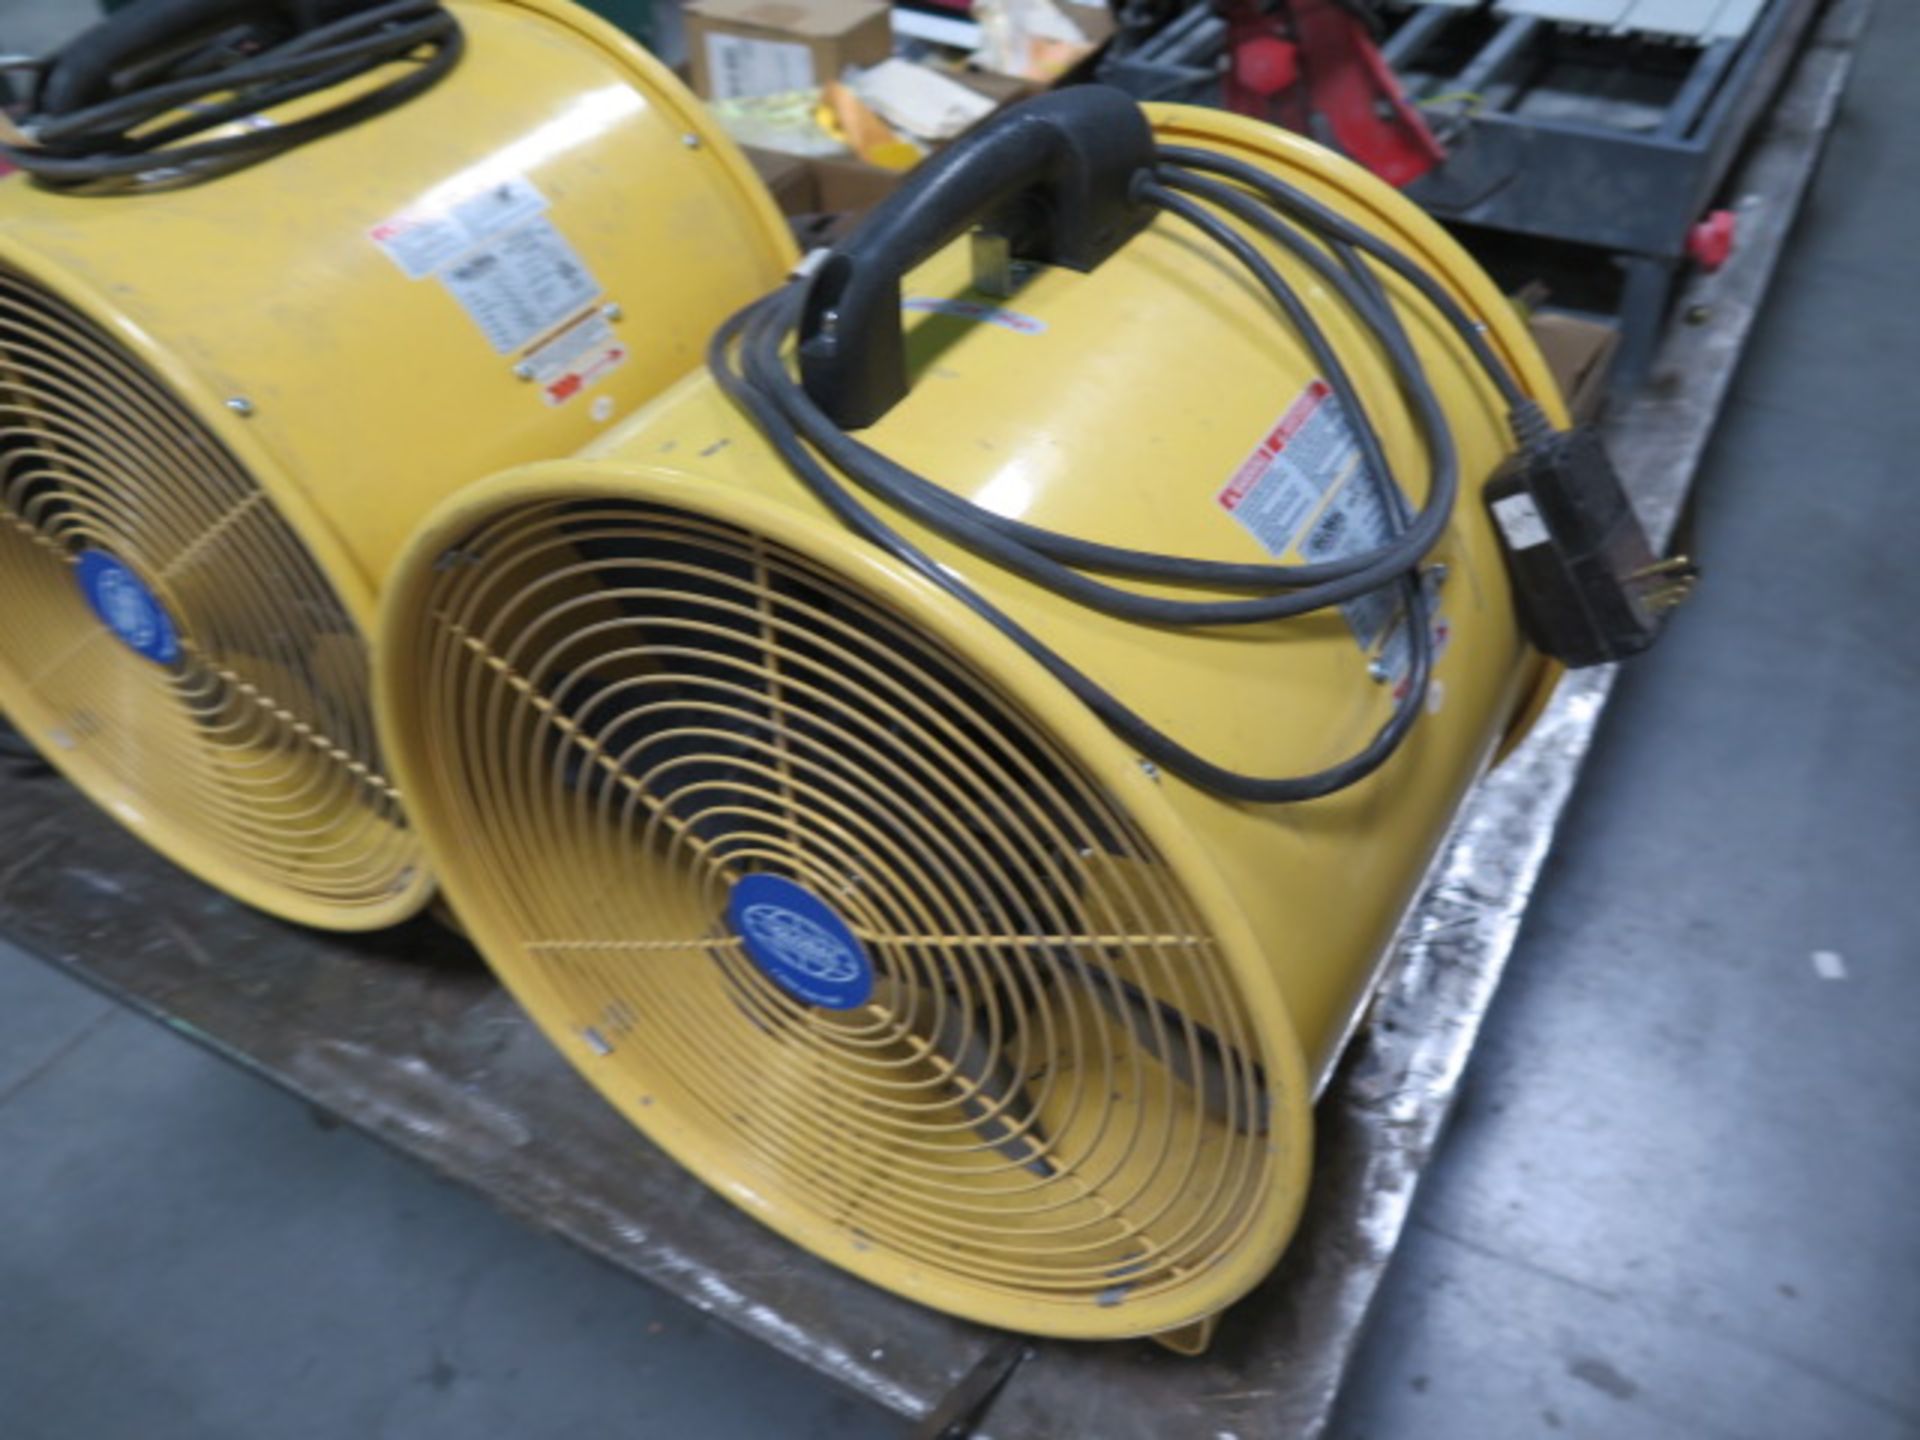 Global Portable Ventilation Fans (2) and Propane Heater (SOLD AS-IS - NO WARRANTY) - Image 3 of 7